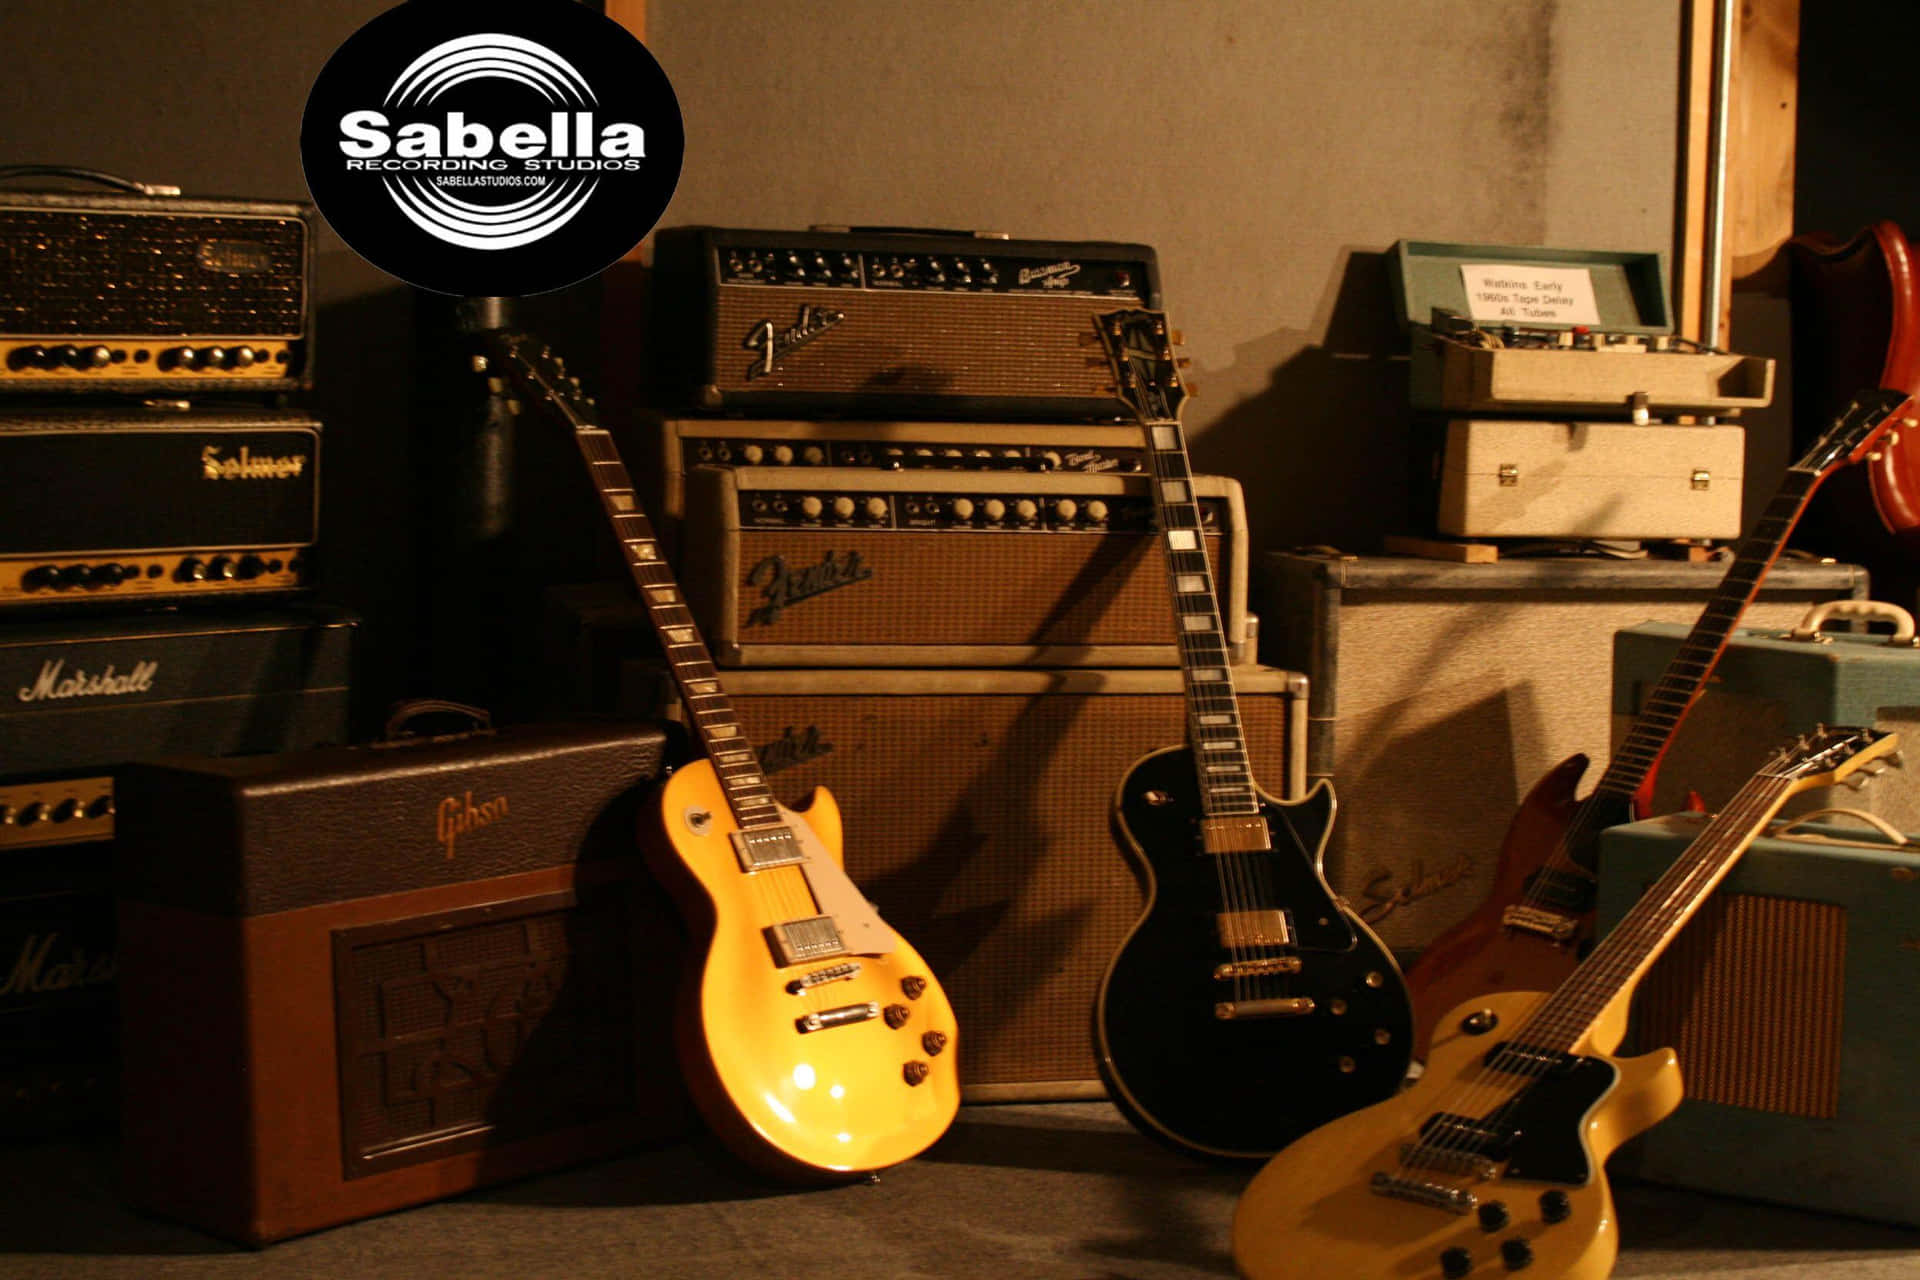 A guitar amp for electric guitars, providing full and vibrant sound. Wallpaper